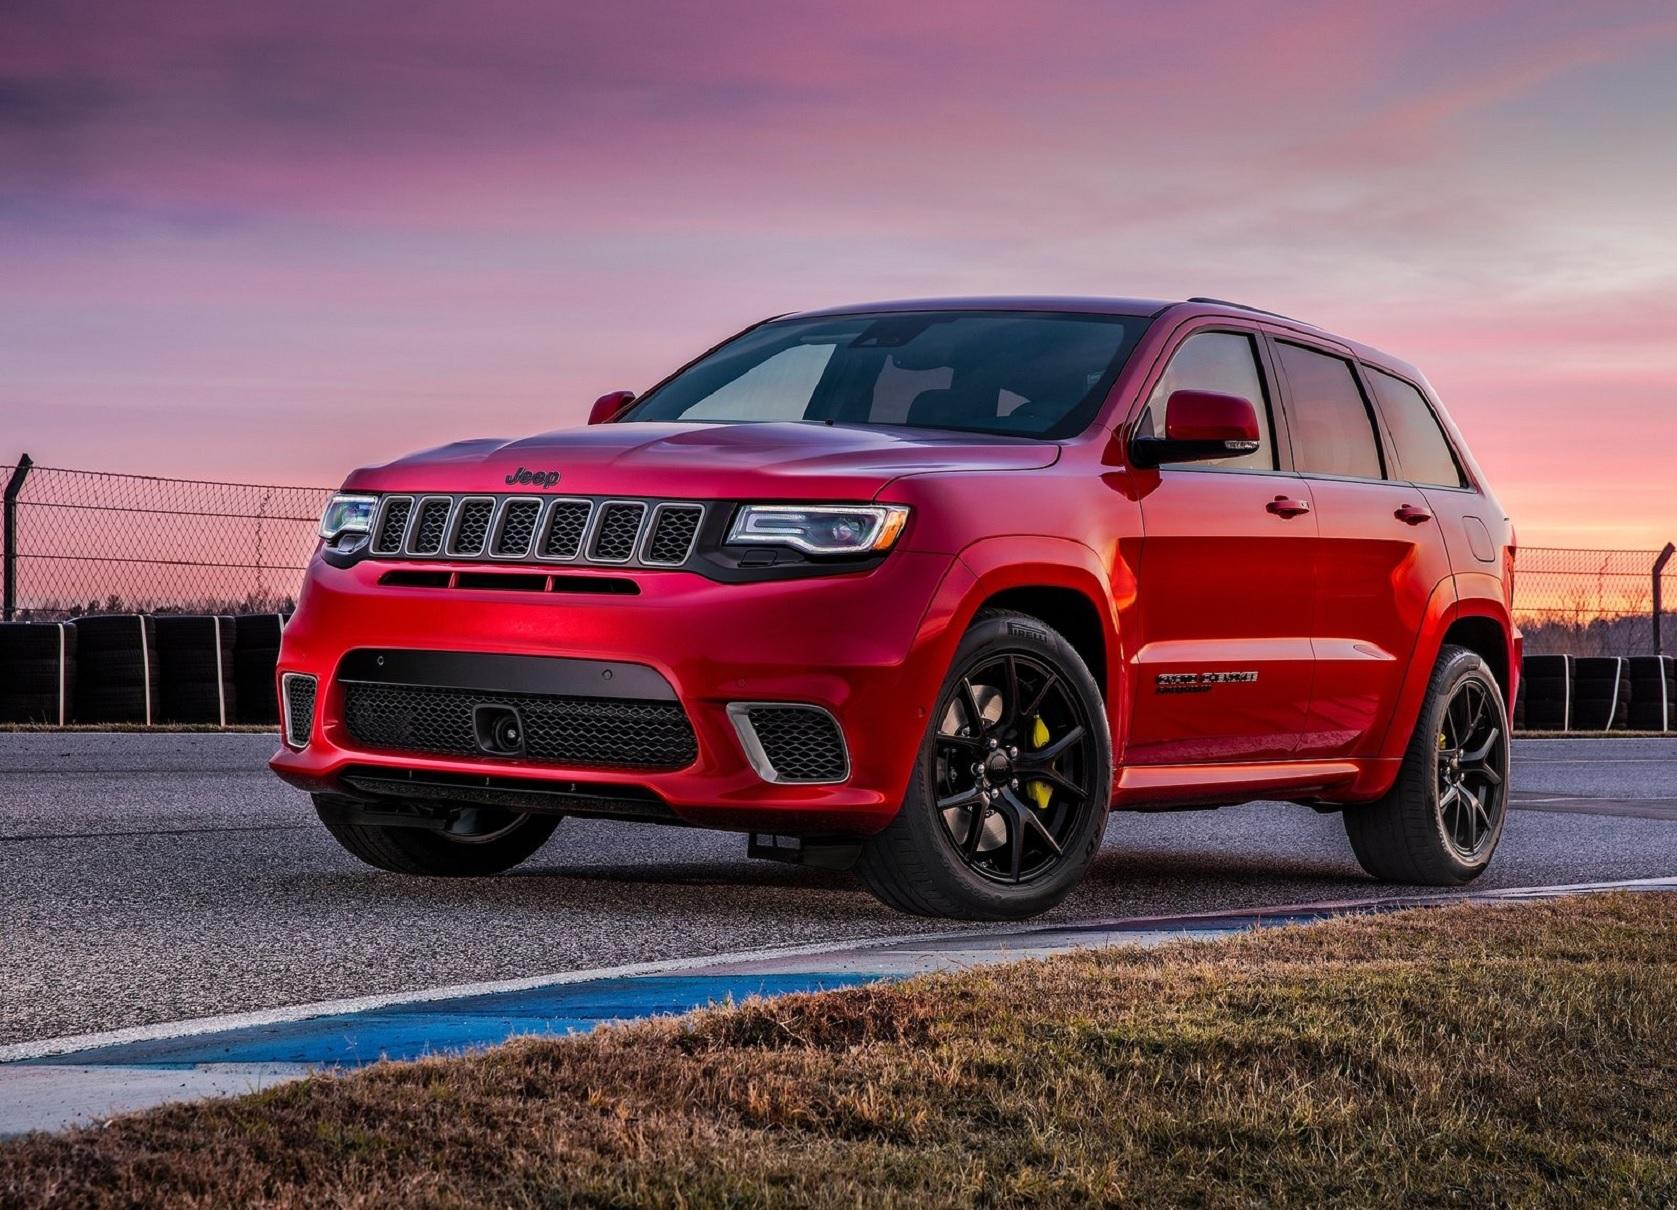 A red 2021 Jeep Grand Cherokee Trackhawk on a racetrack at sunset